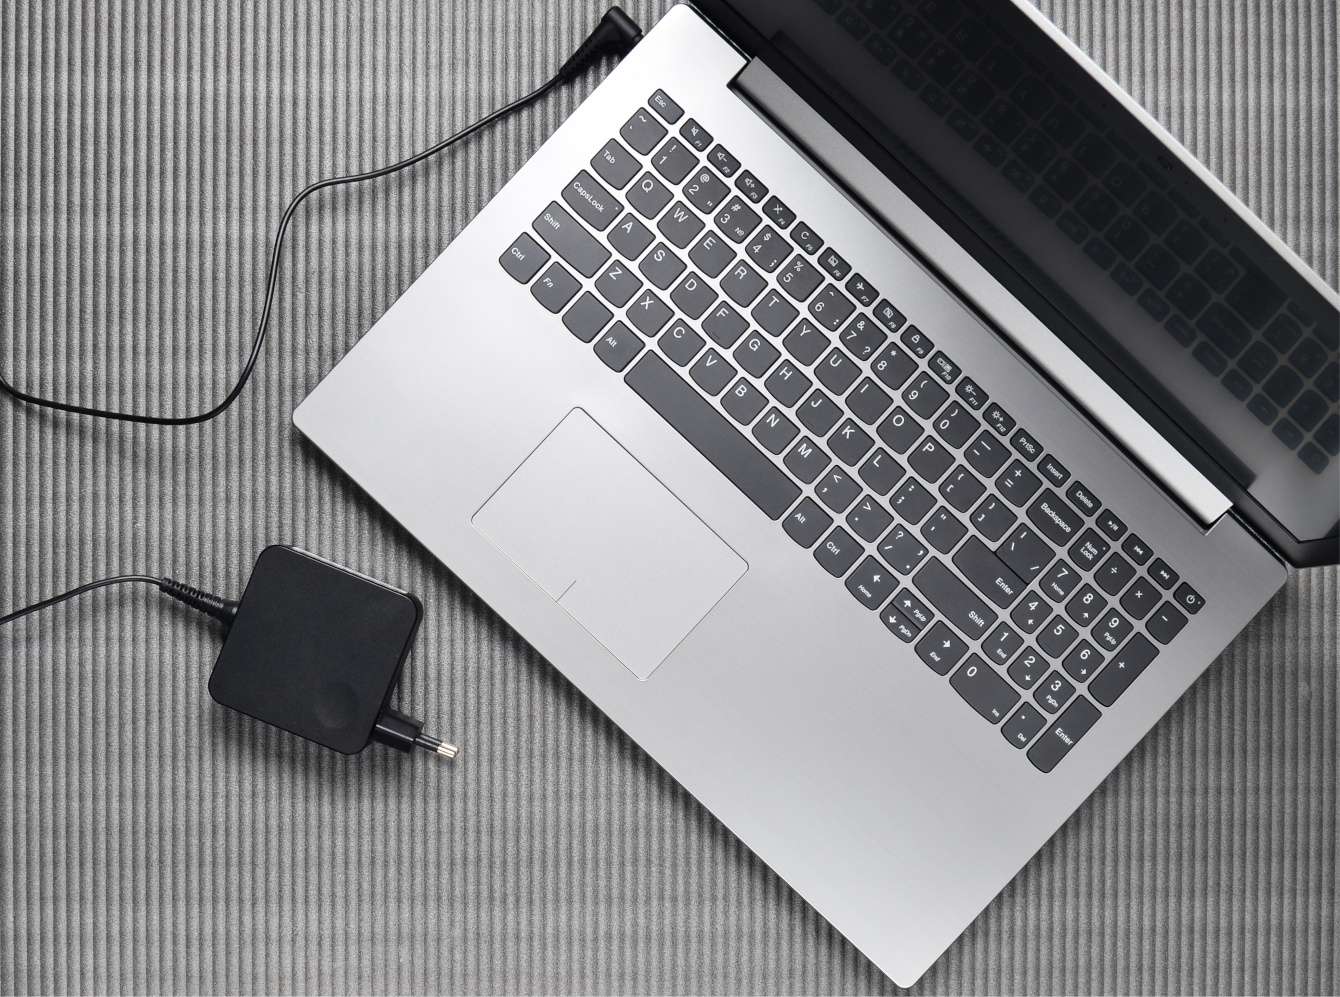 laptop with the AC adapter lying next to it